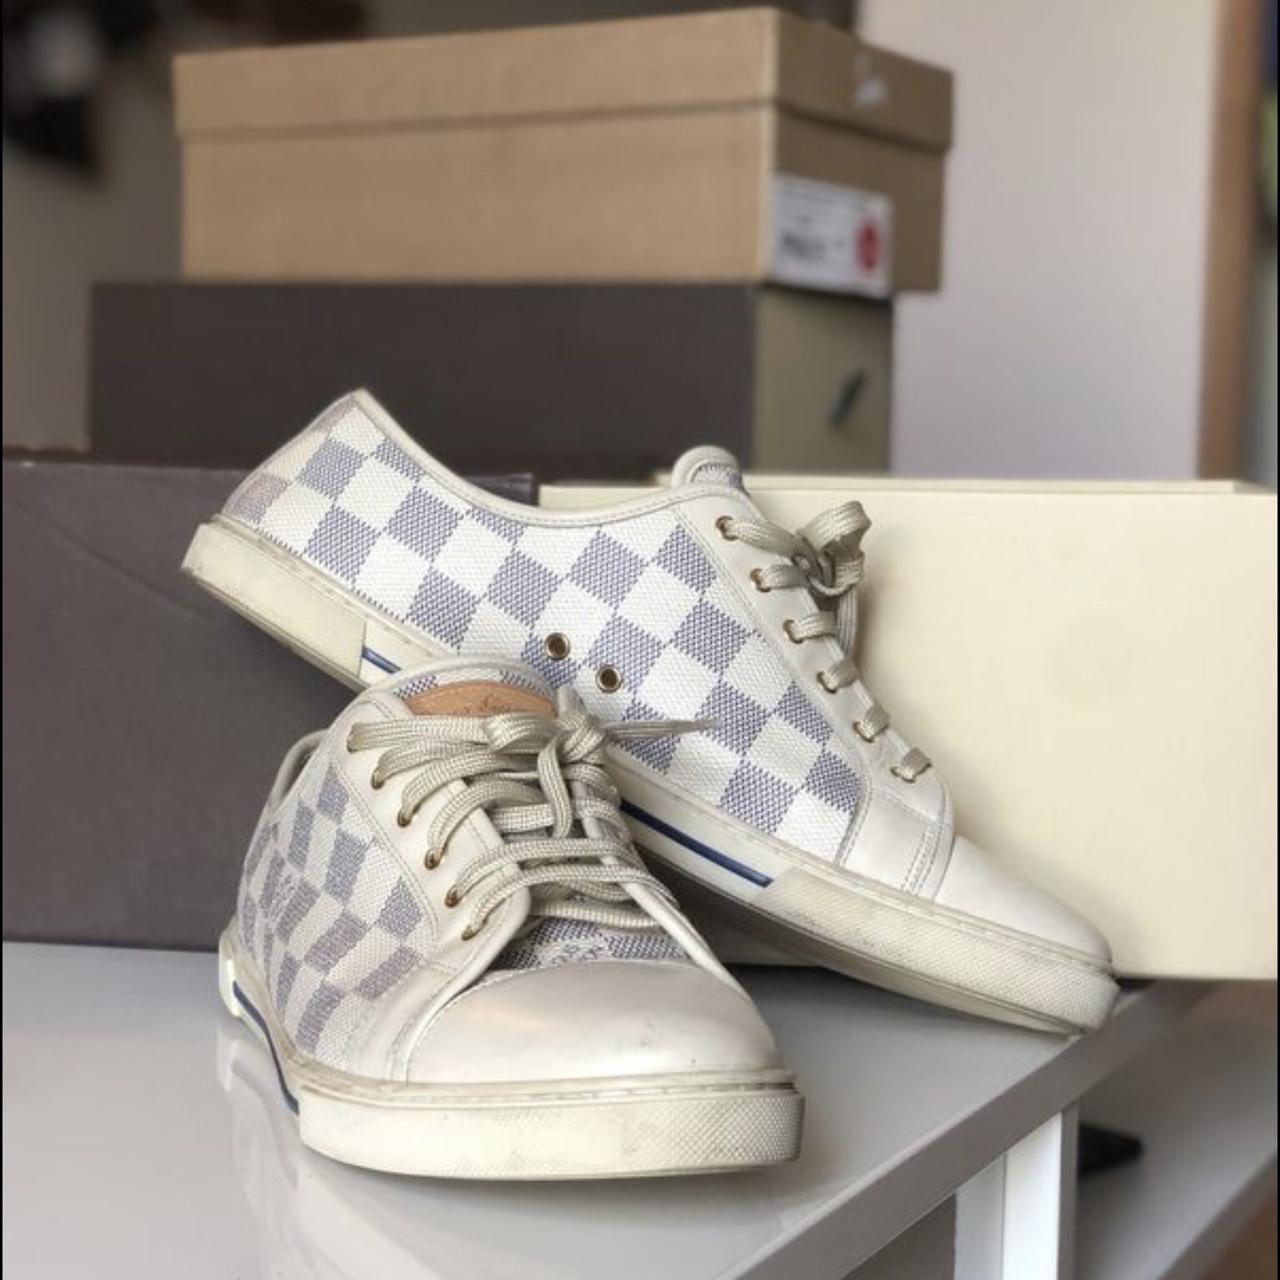 Louis Vuitton Luxembourg sneakers in white. Brand - Depop